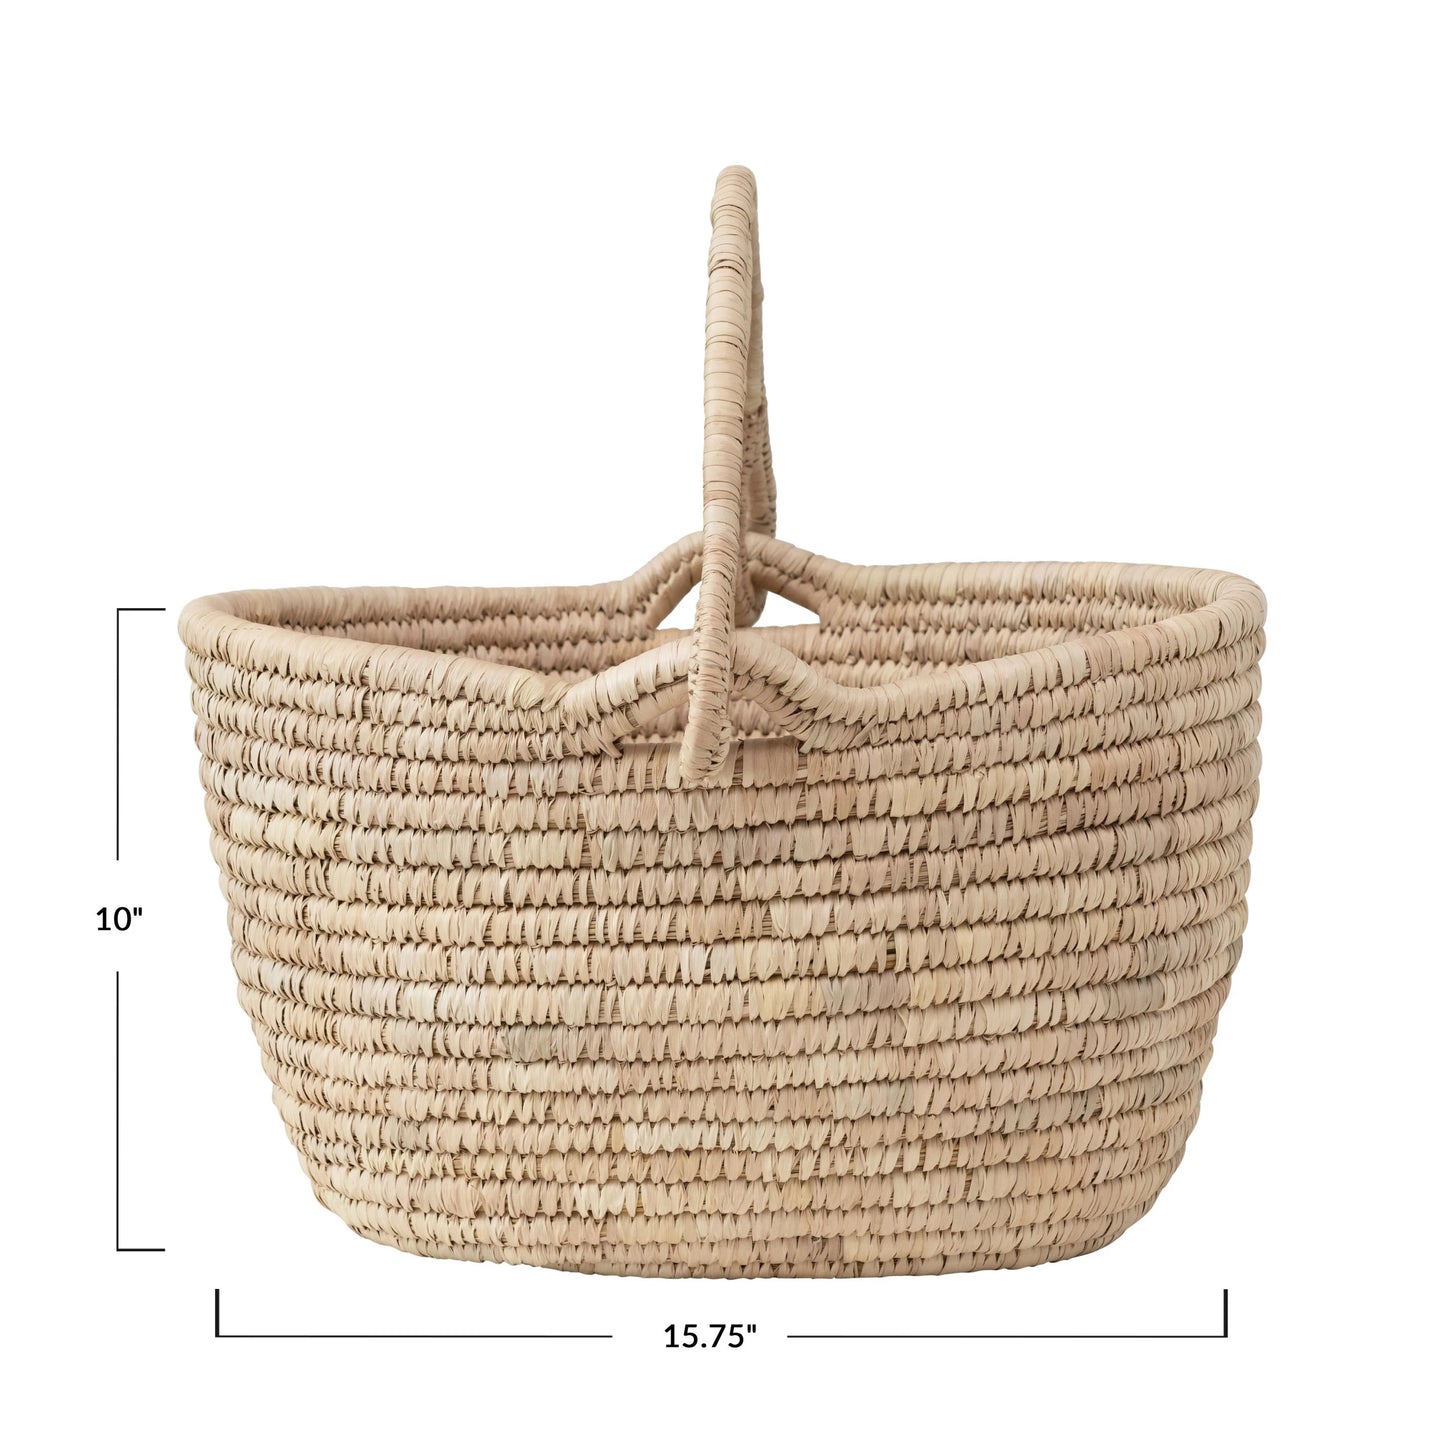 Naples Woven Basket with Handle